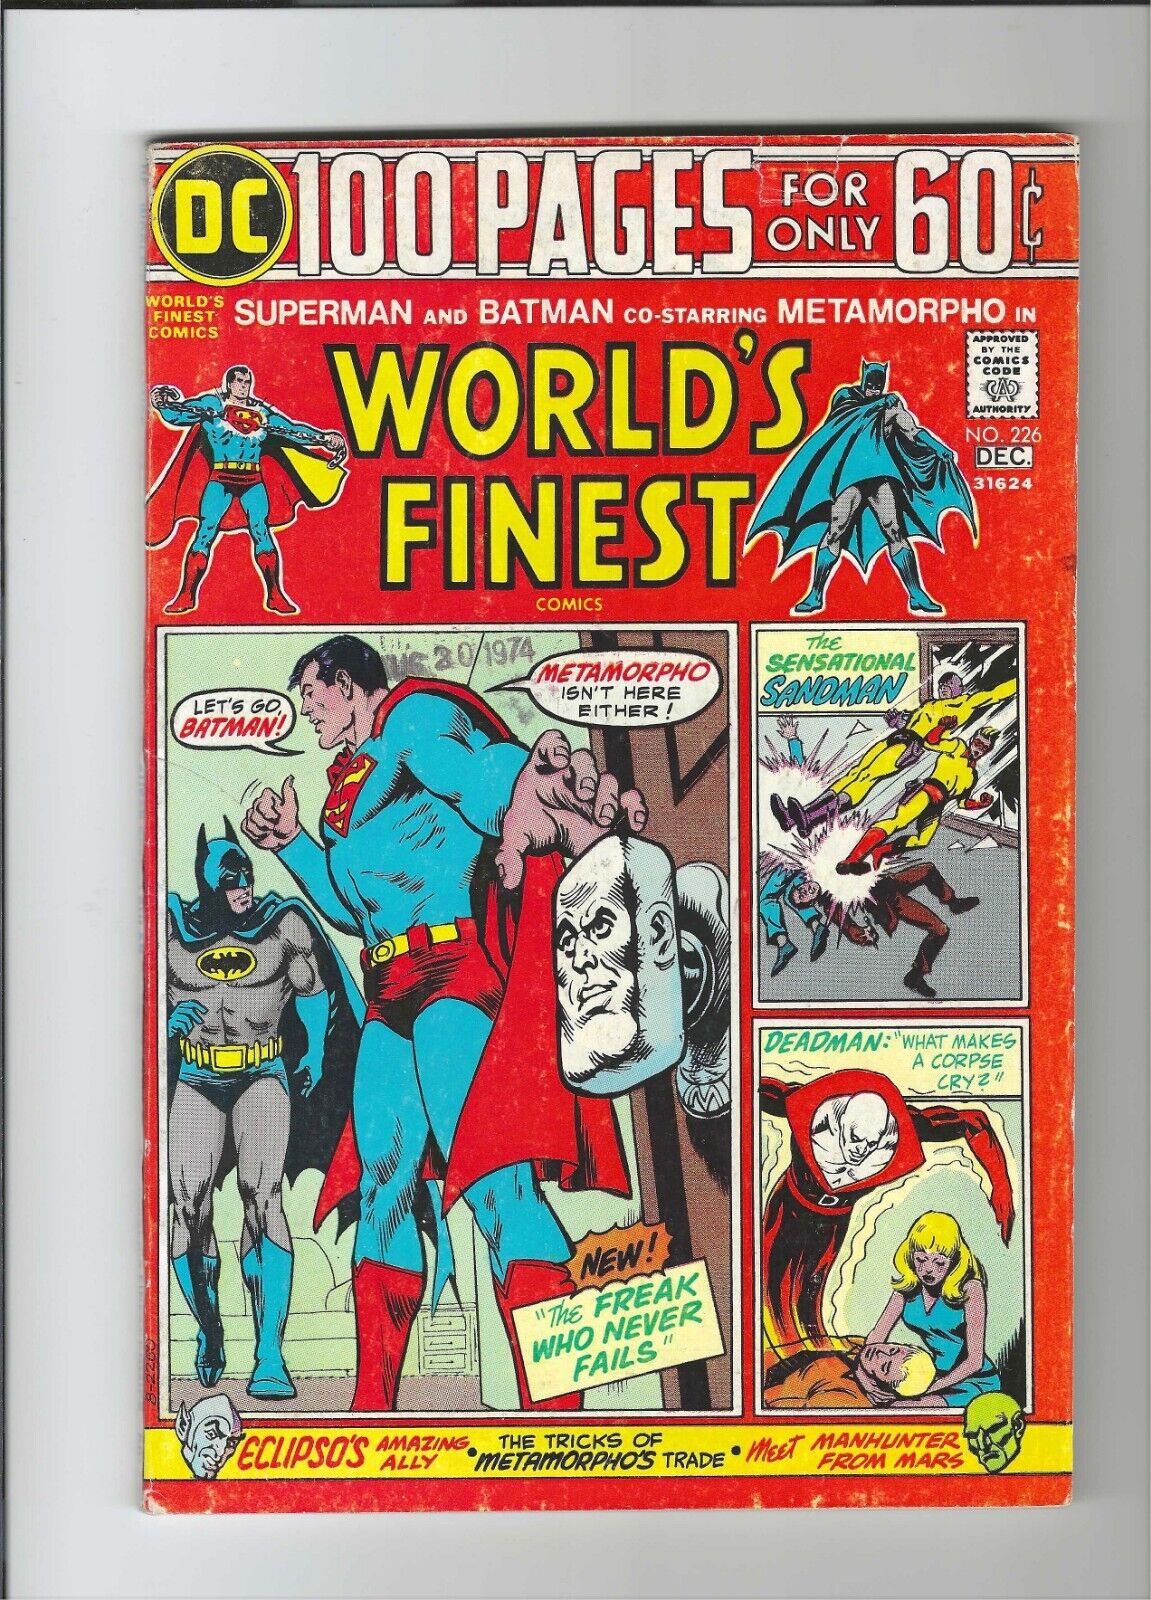 World's Finest #226: Dry Cleaned: Pressed: Bagged: Boarded VG-FN 5.0